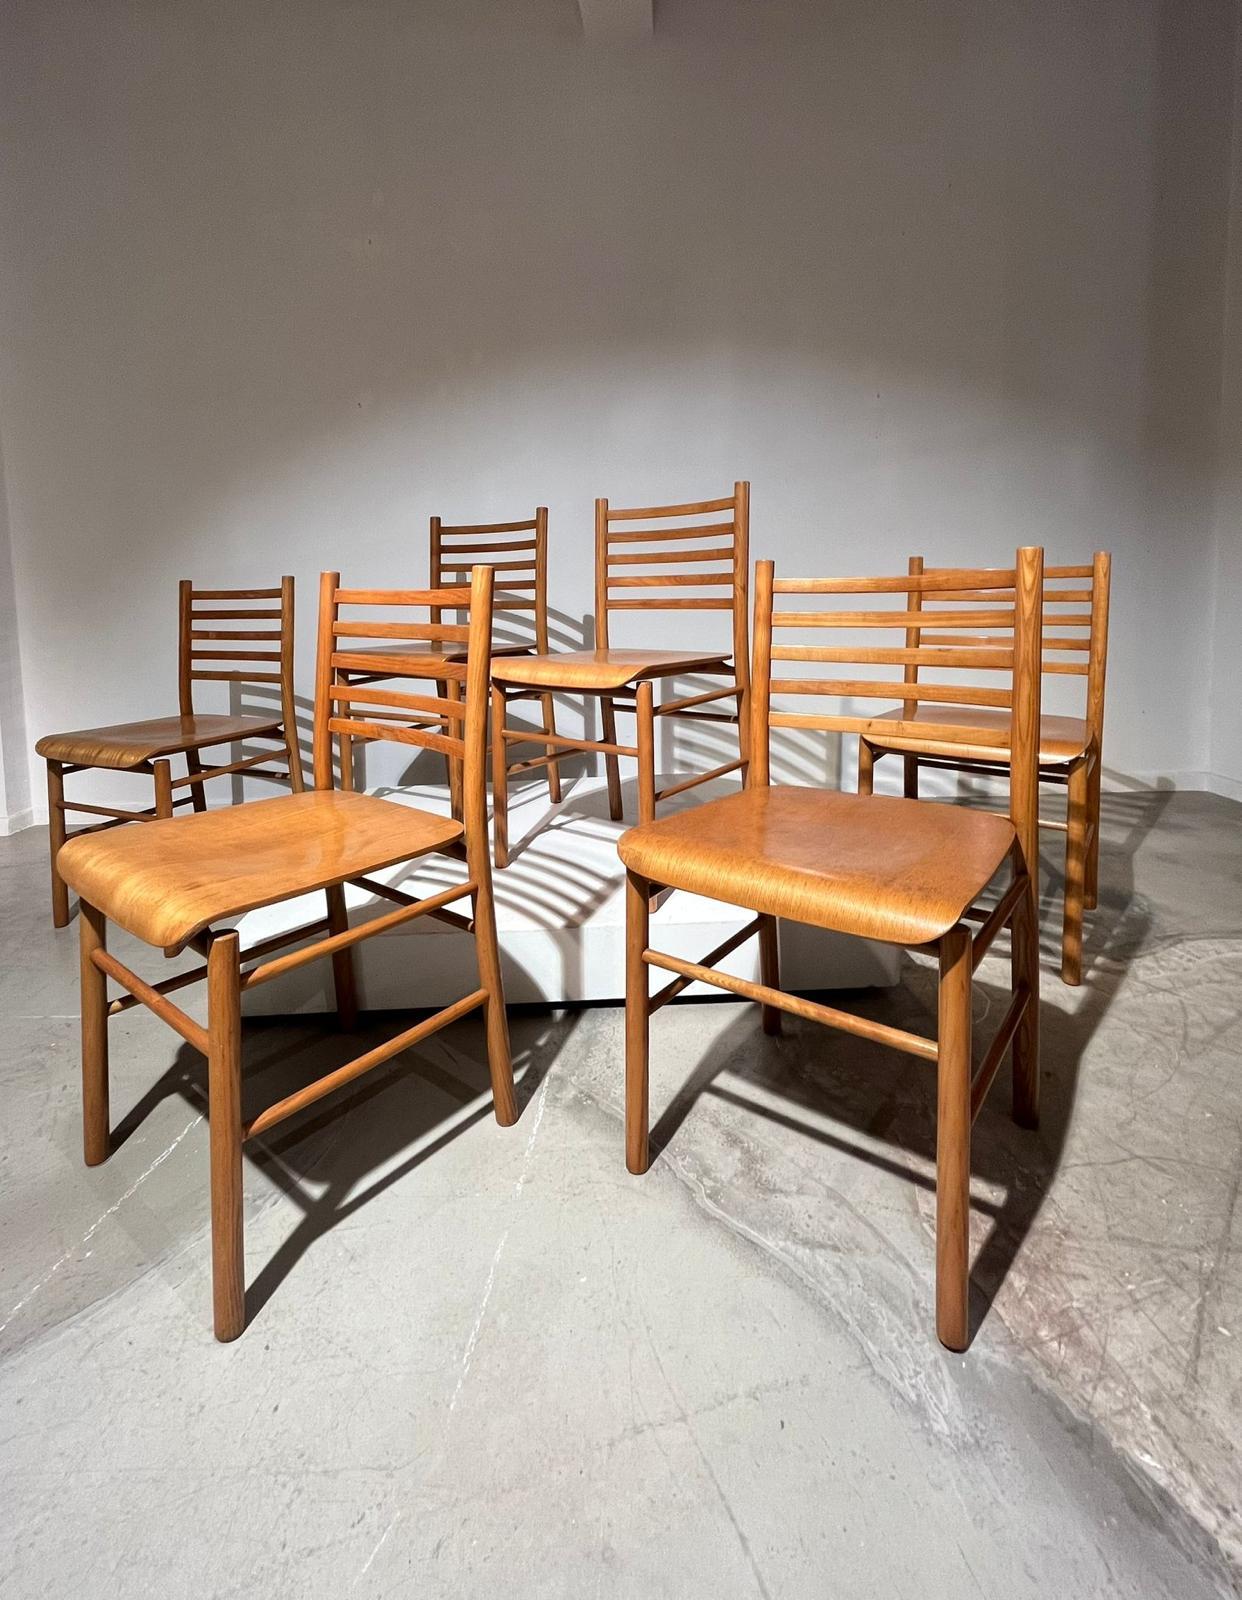 Light wood chairs, set of 6.